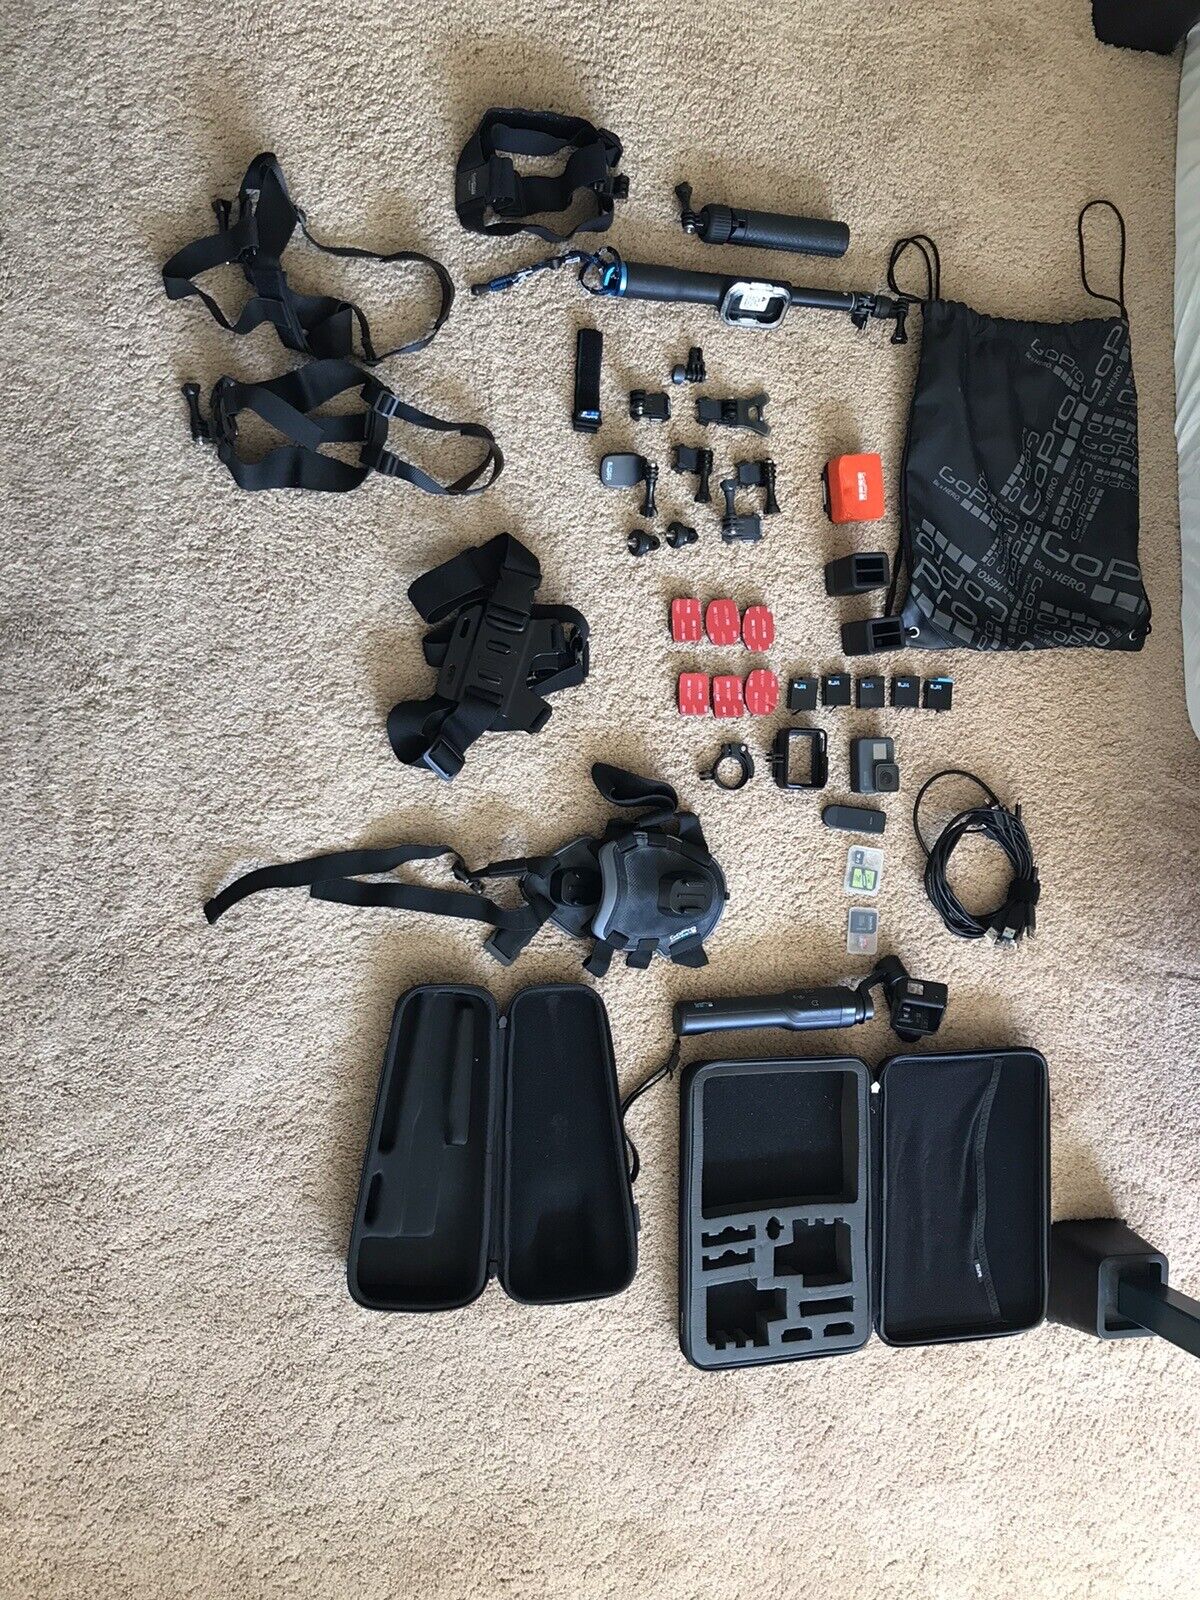 GoPro HERO6 with Accessories